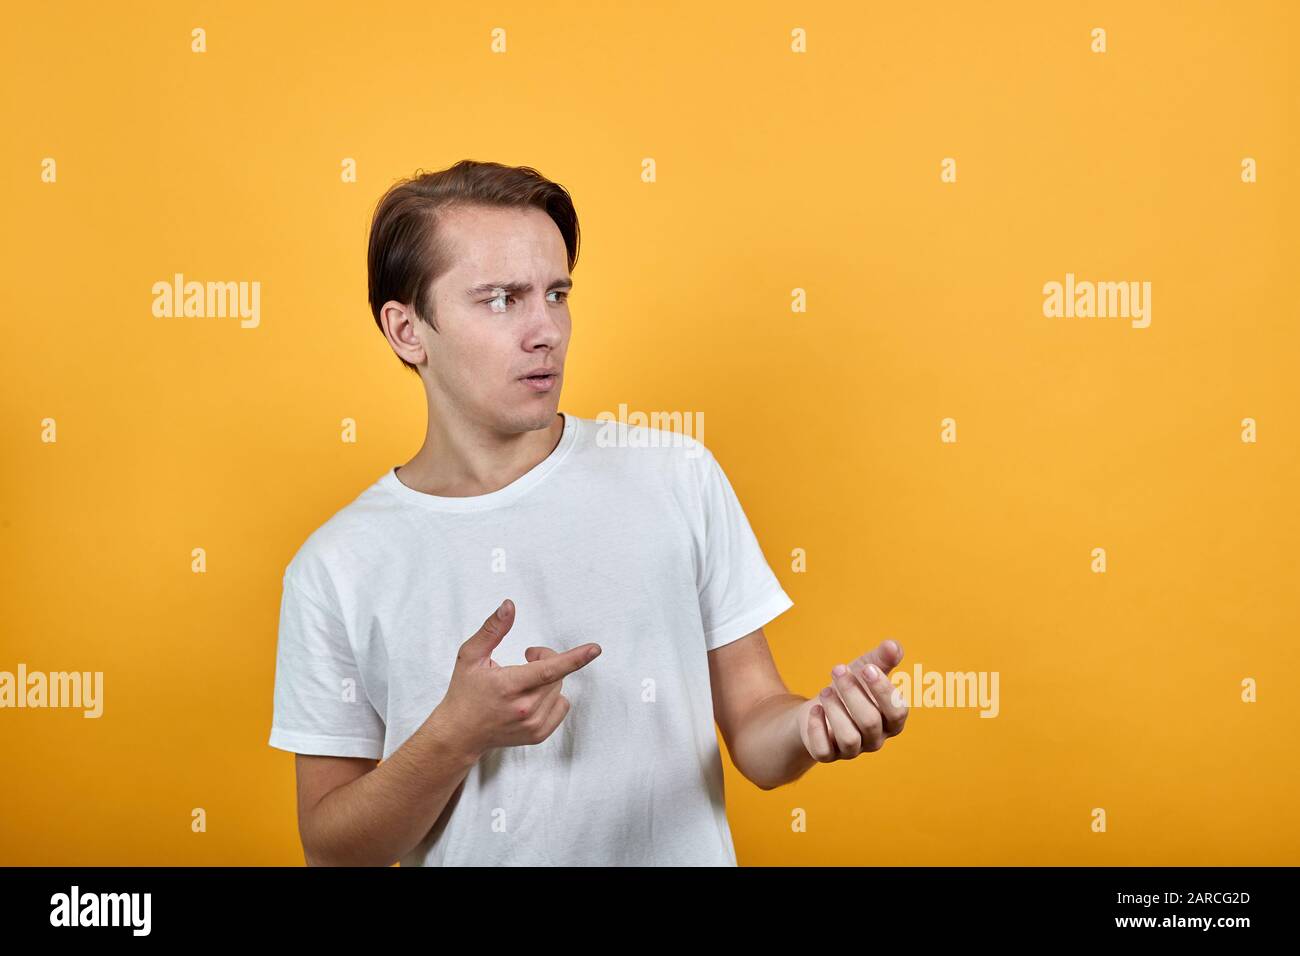 Young man looks away in surprise and raises his hands. Stock Photo